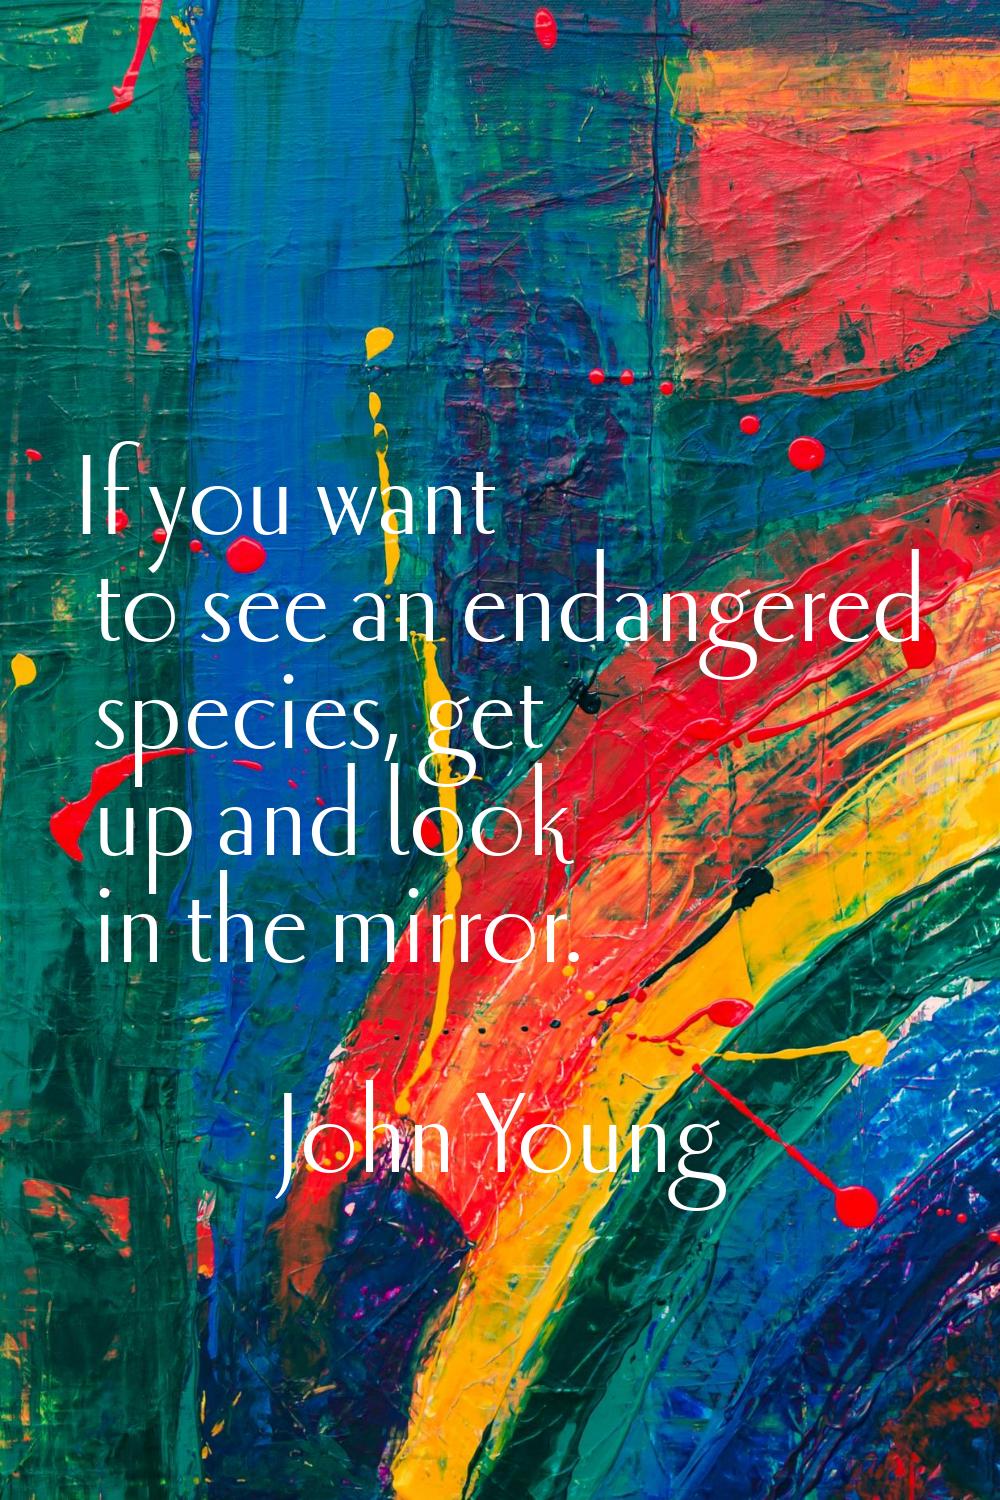 If you want to see an endangered species, get up and look in the mirror.